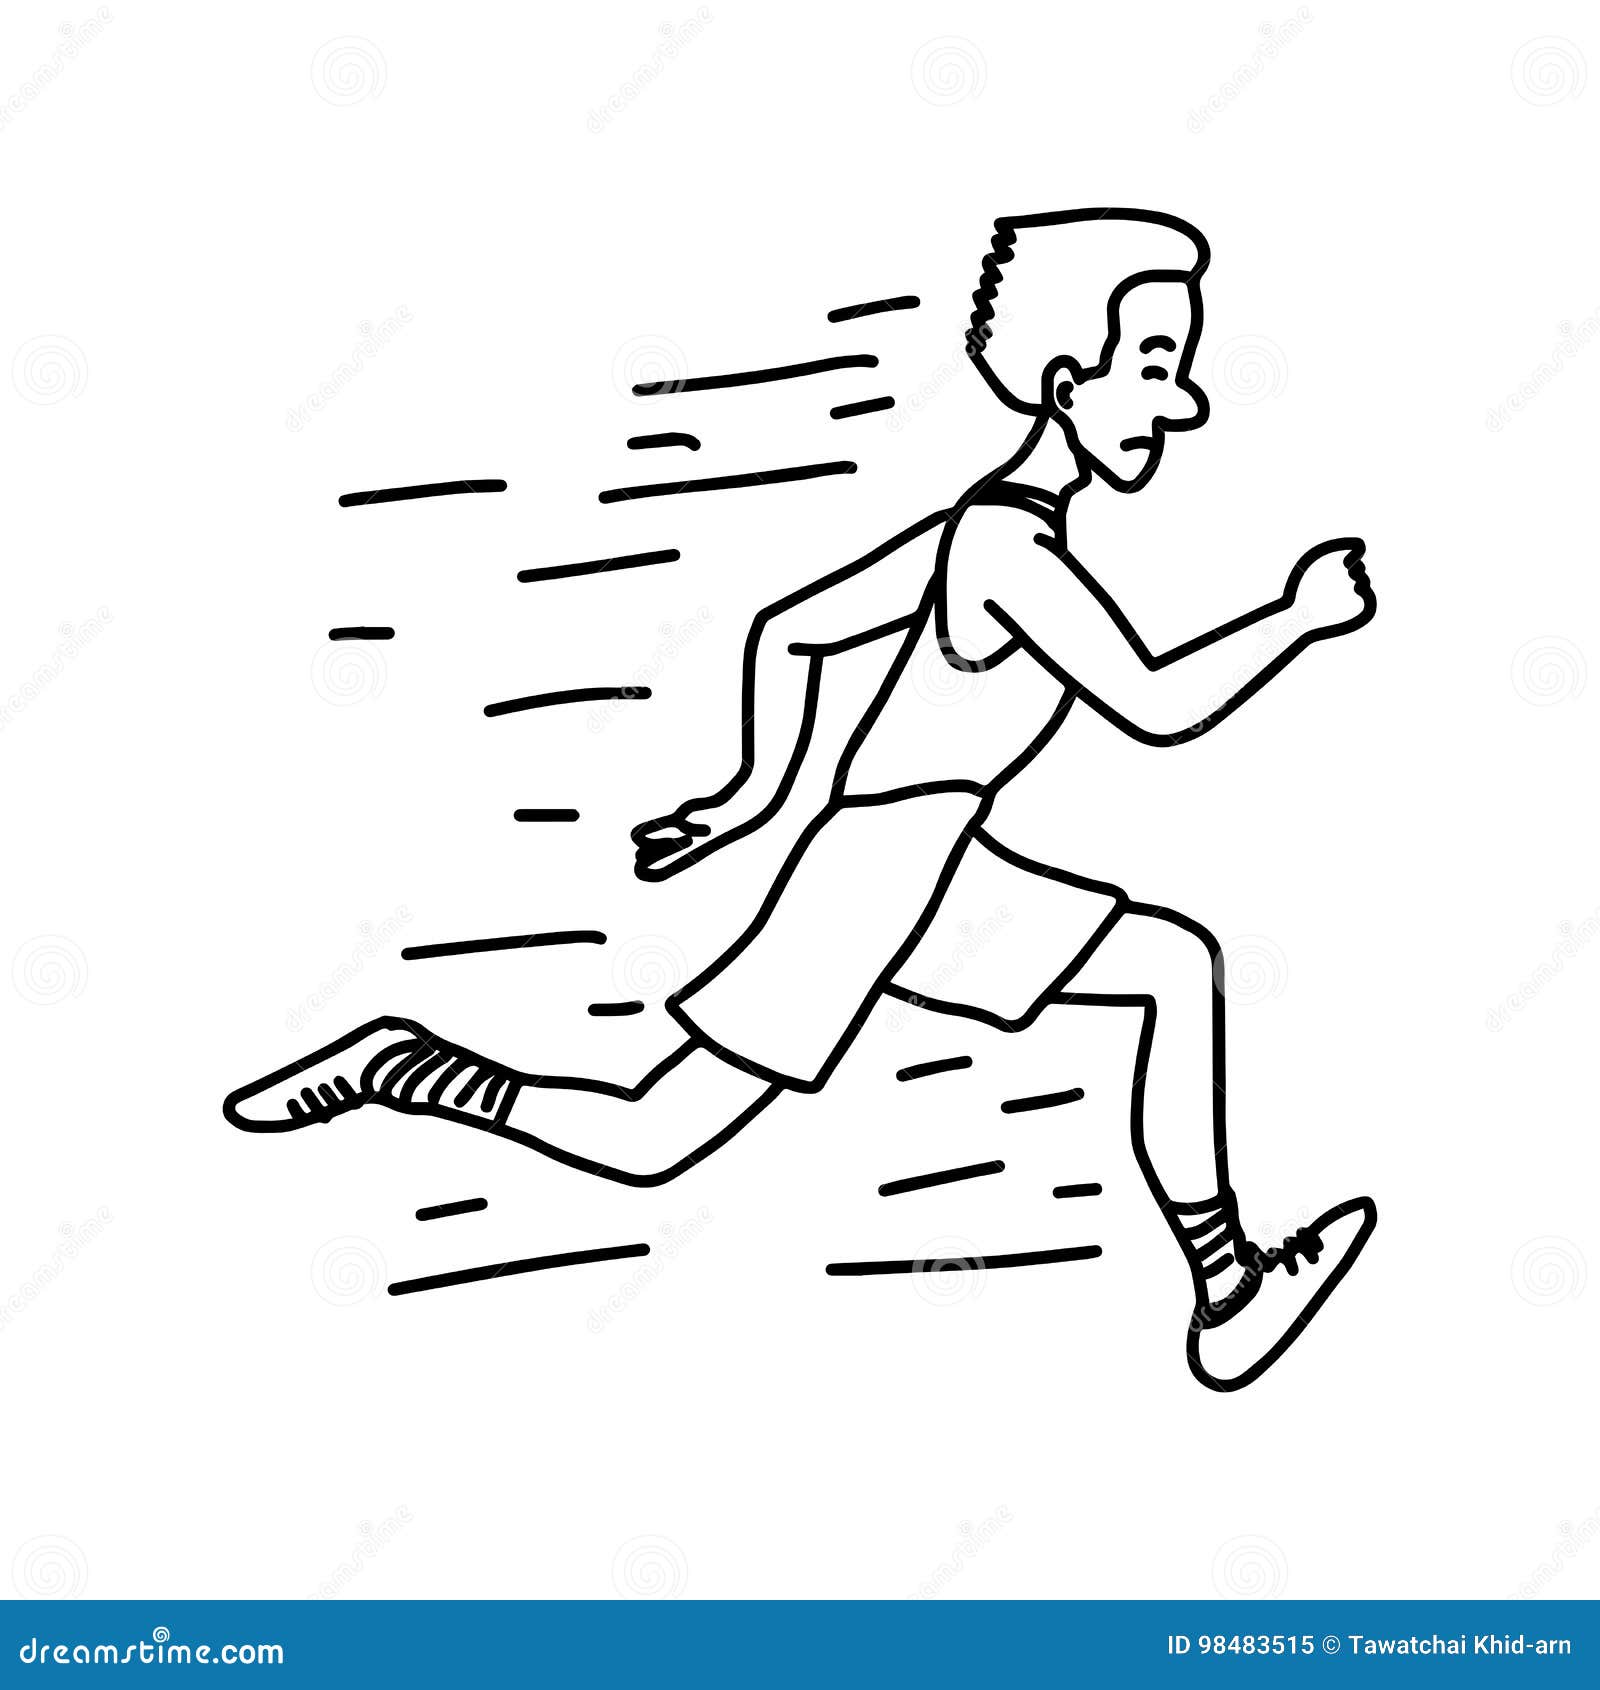 Male Runner Vector Illustration Sketch Hand Drawn With Black L Stock Vector Illustration Of Field Exercise